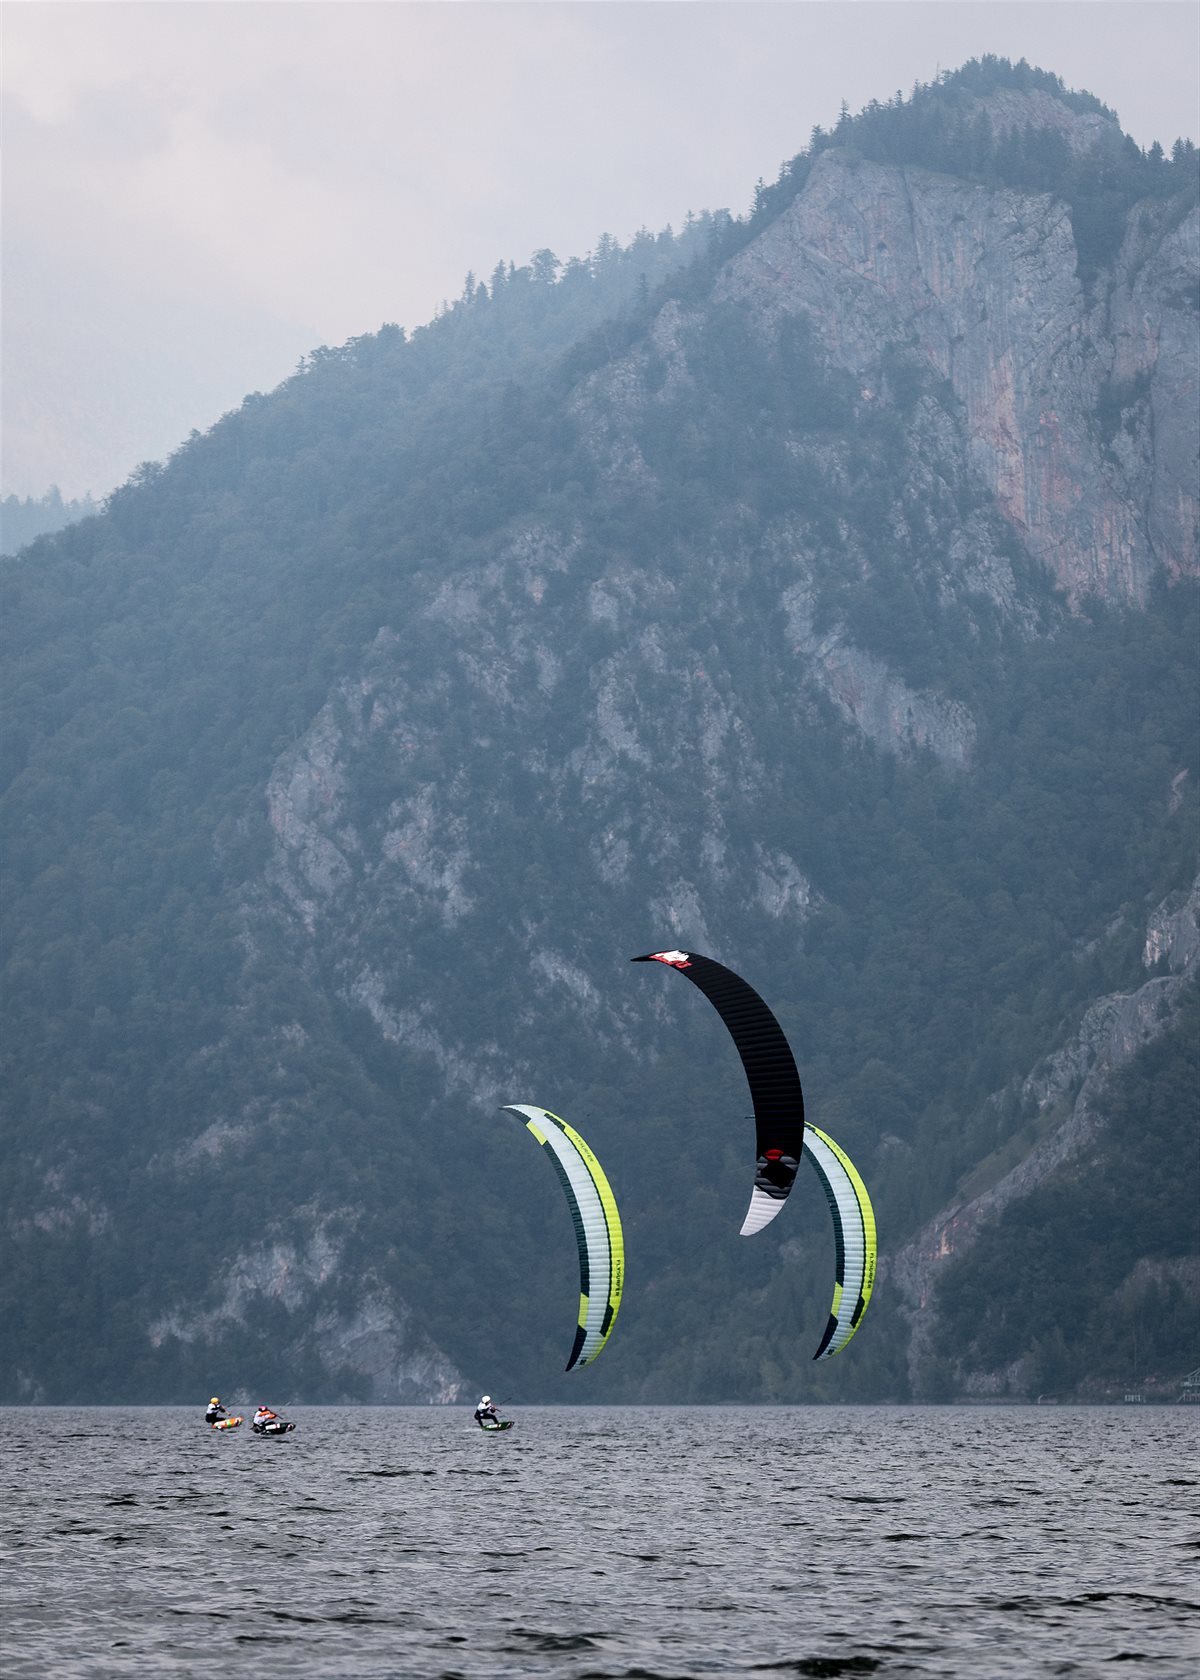 KiteFoil Traunsee